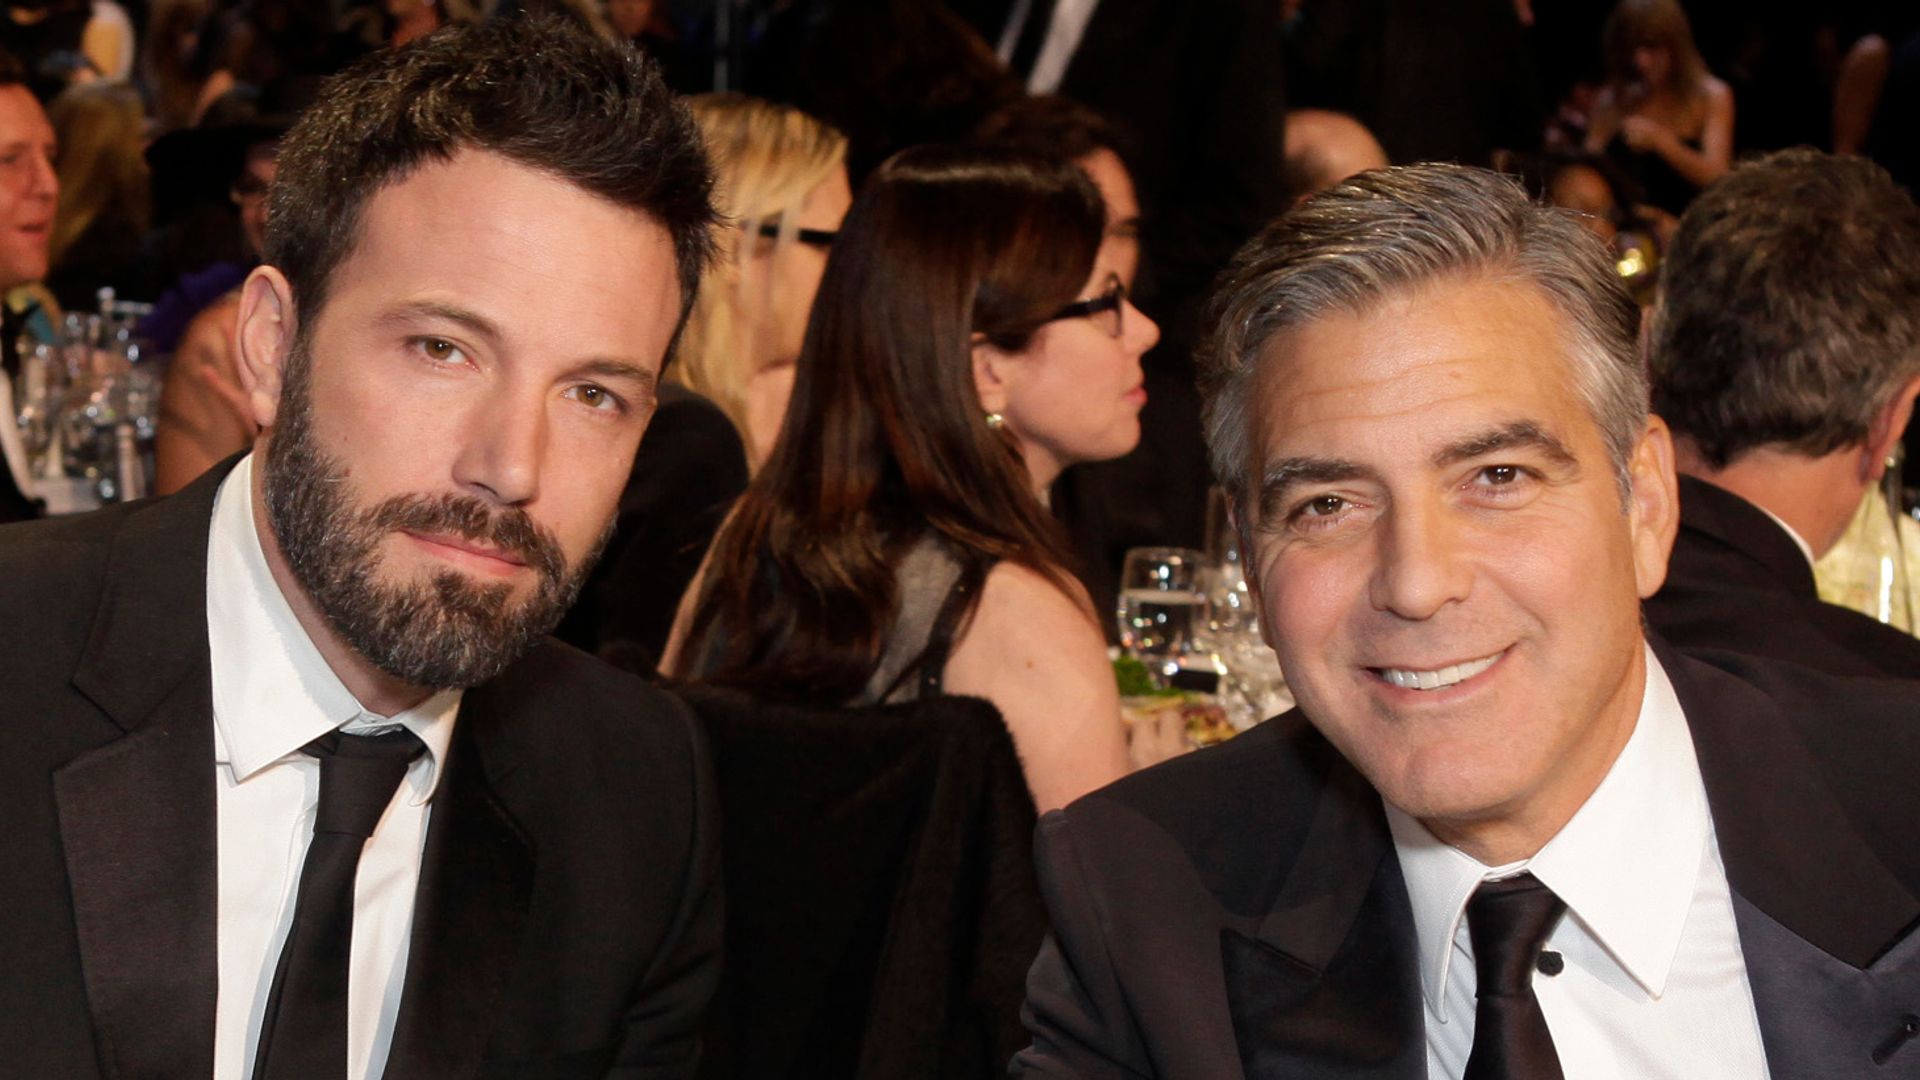 Director Ben Affleck and producer Geroge Clooney attend the Critics' Choice Movie Awards 2013 with Champagne Nicolas Feuillatte at Barkar Hangar on January 10, 2013 in Santa Monica, California.